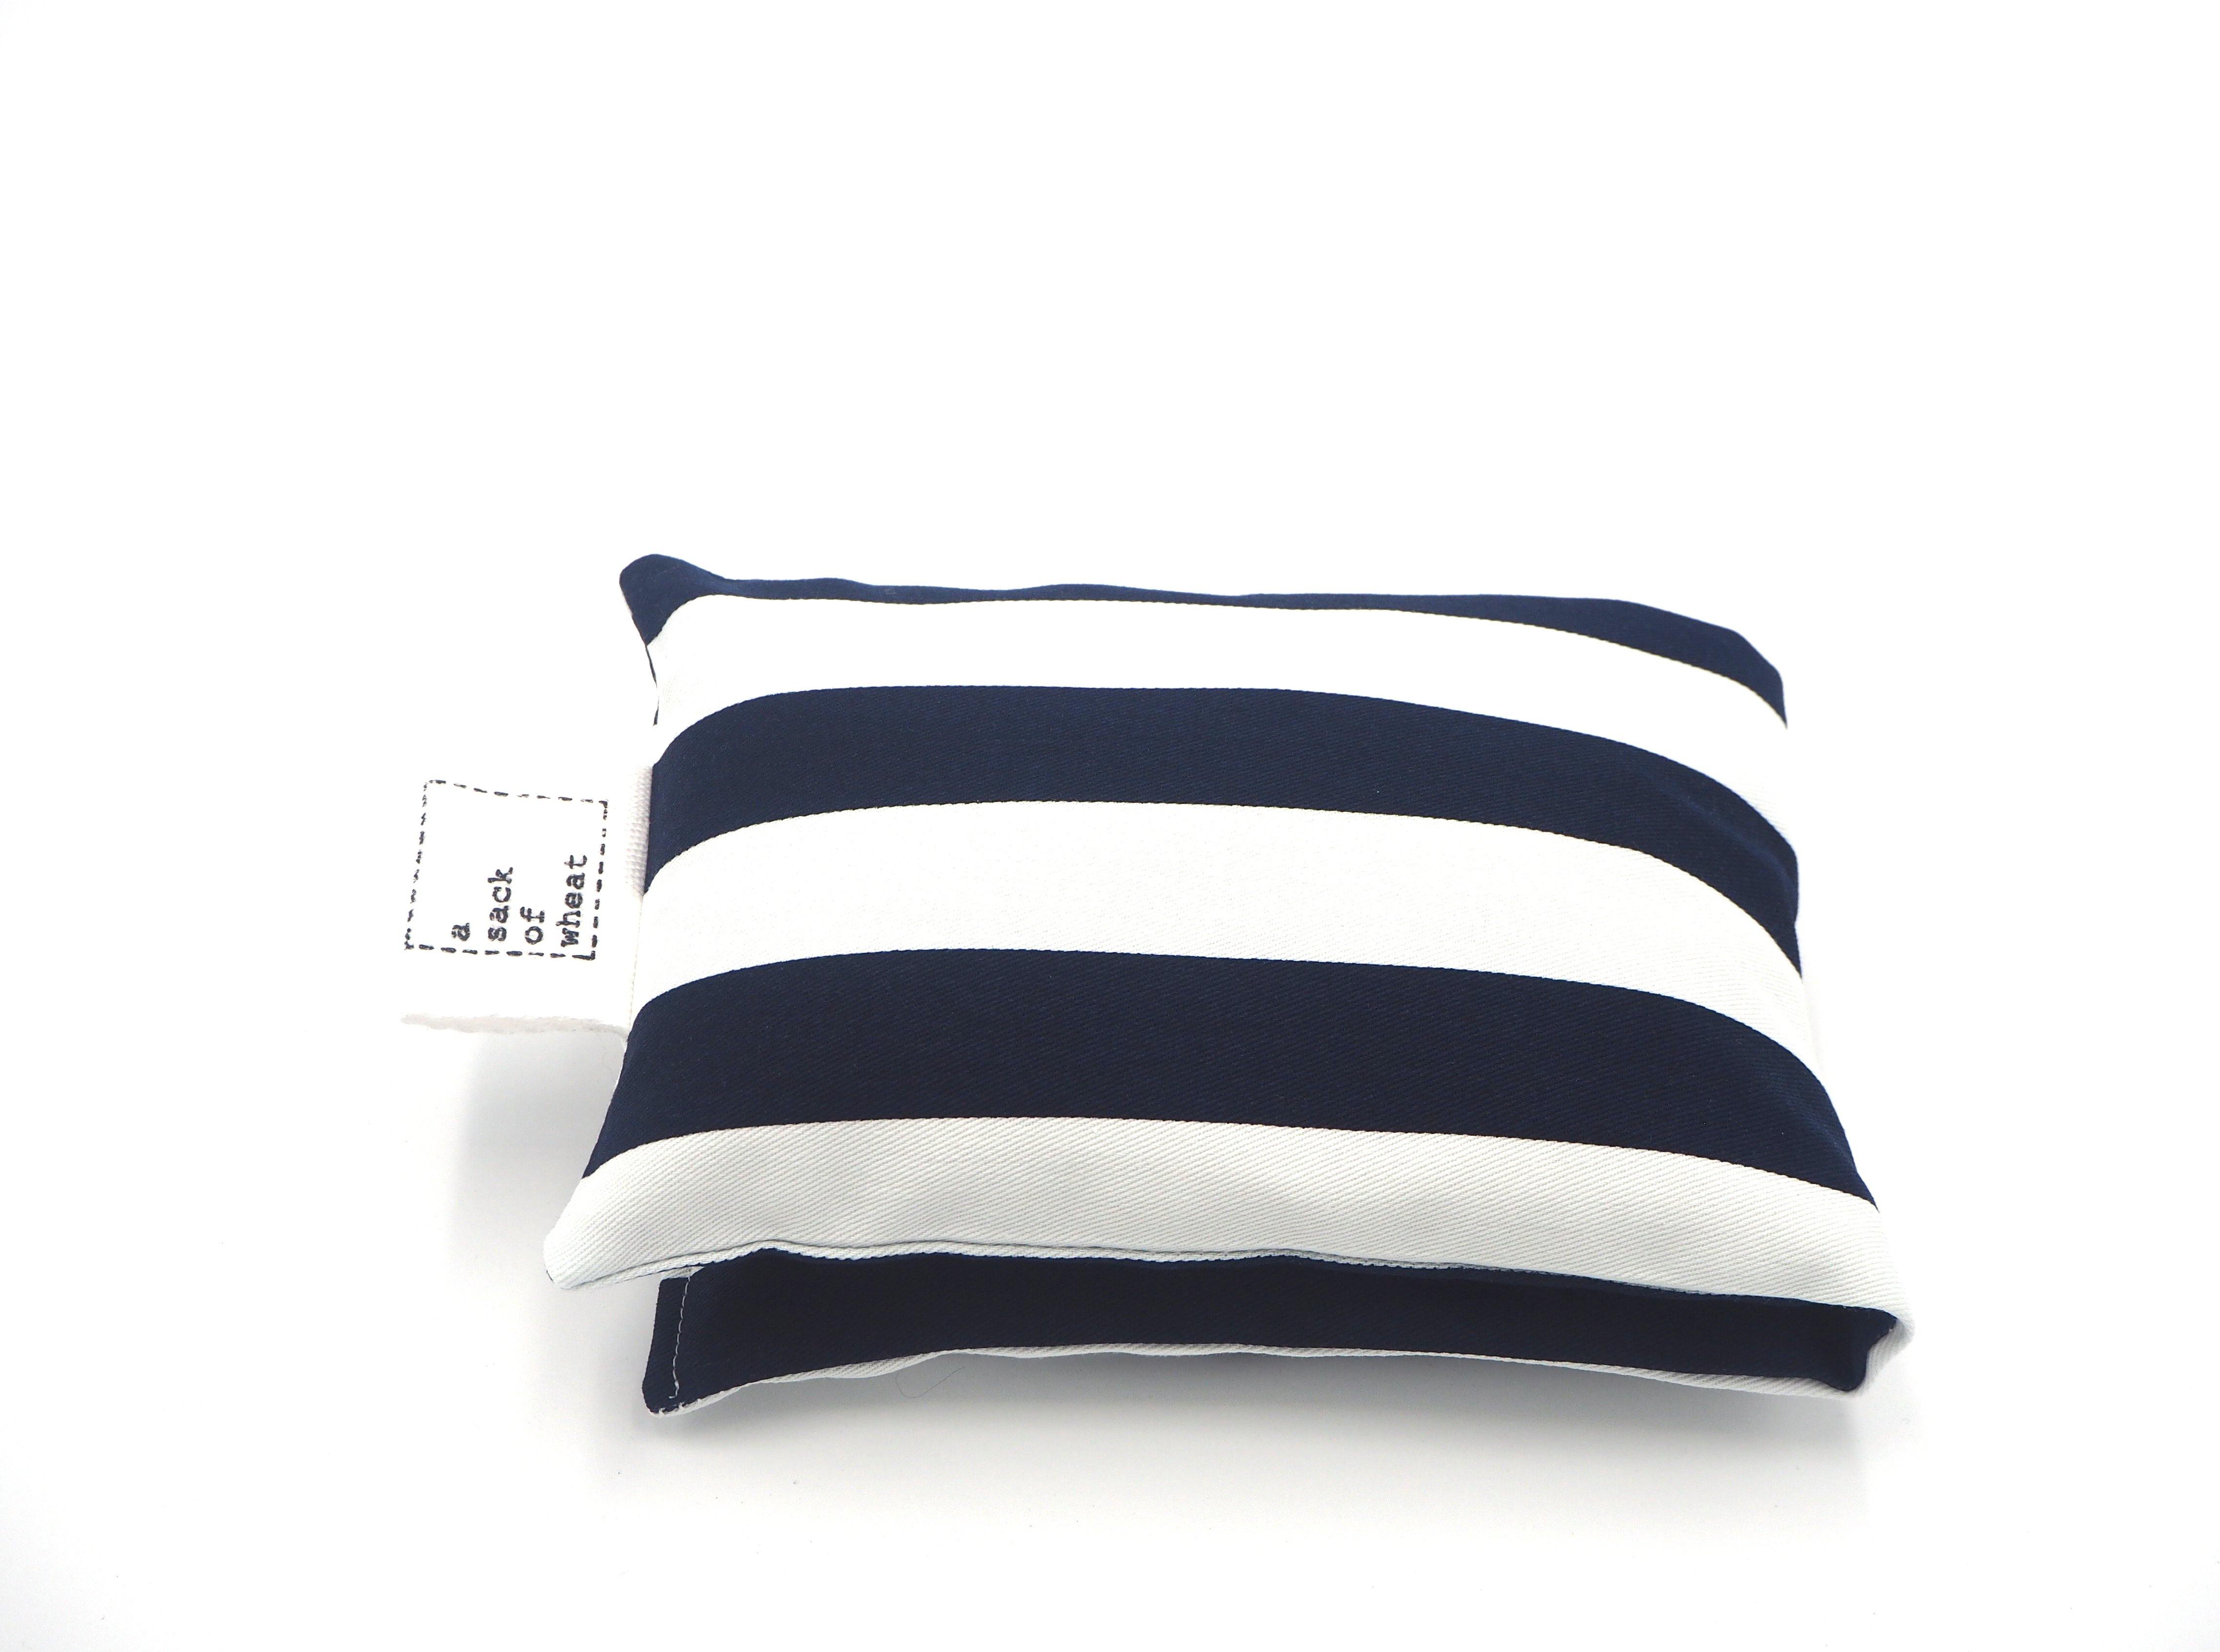 Folded view of A Sack Of Wheat, featuring a classic Navy & White striped print, 100% cotton fabric